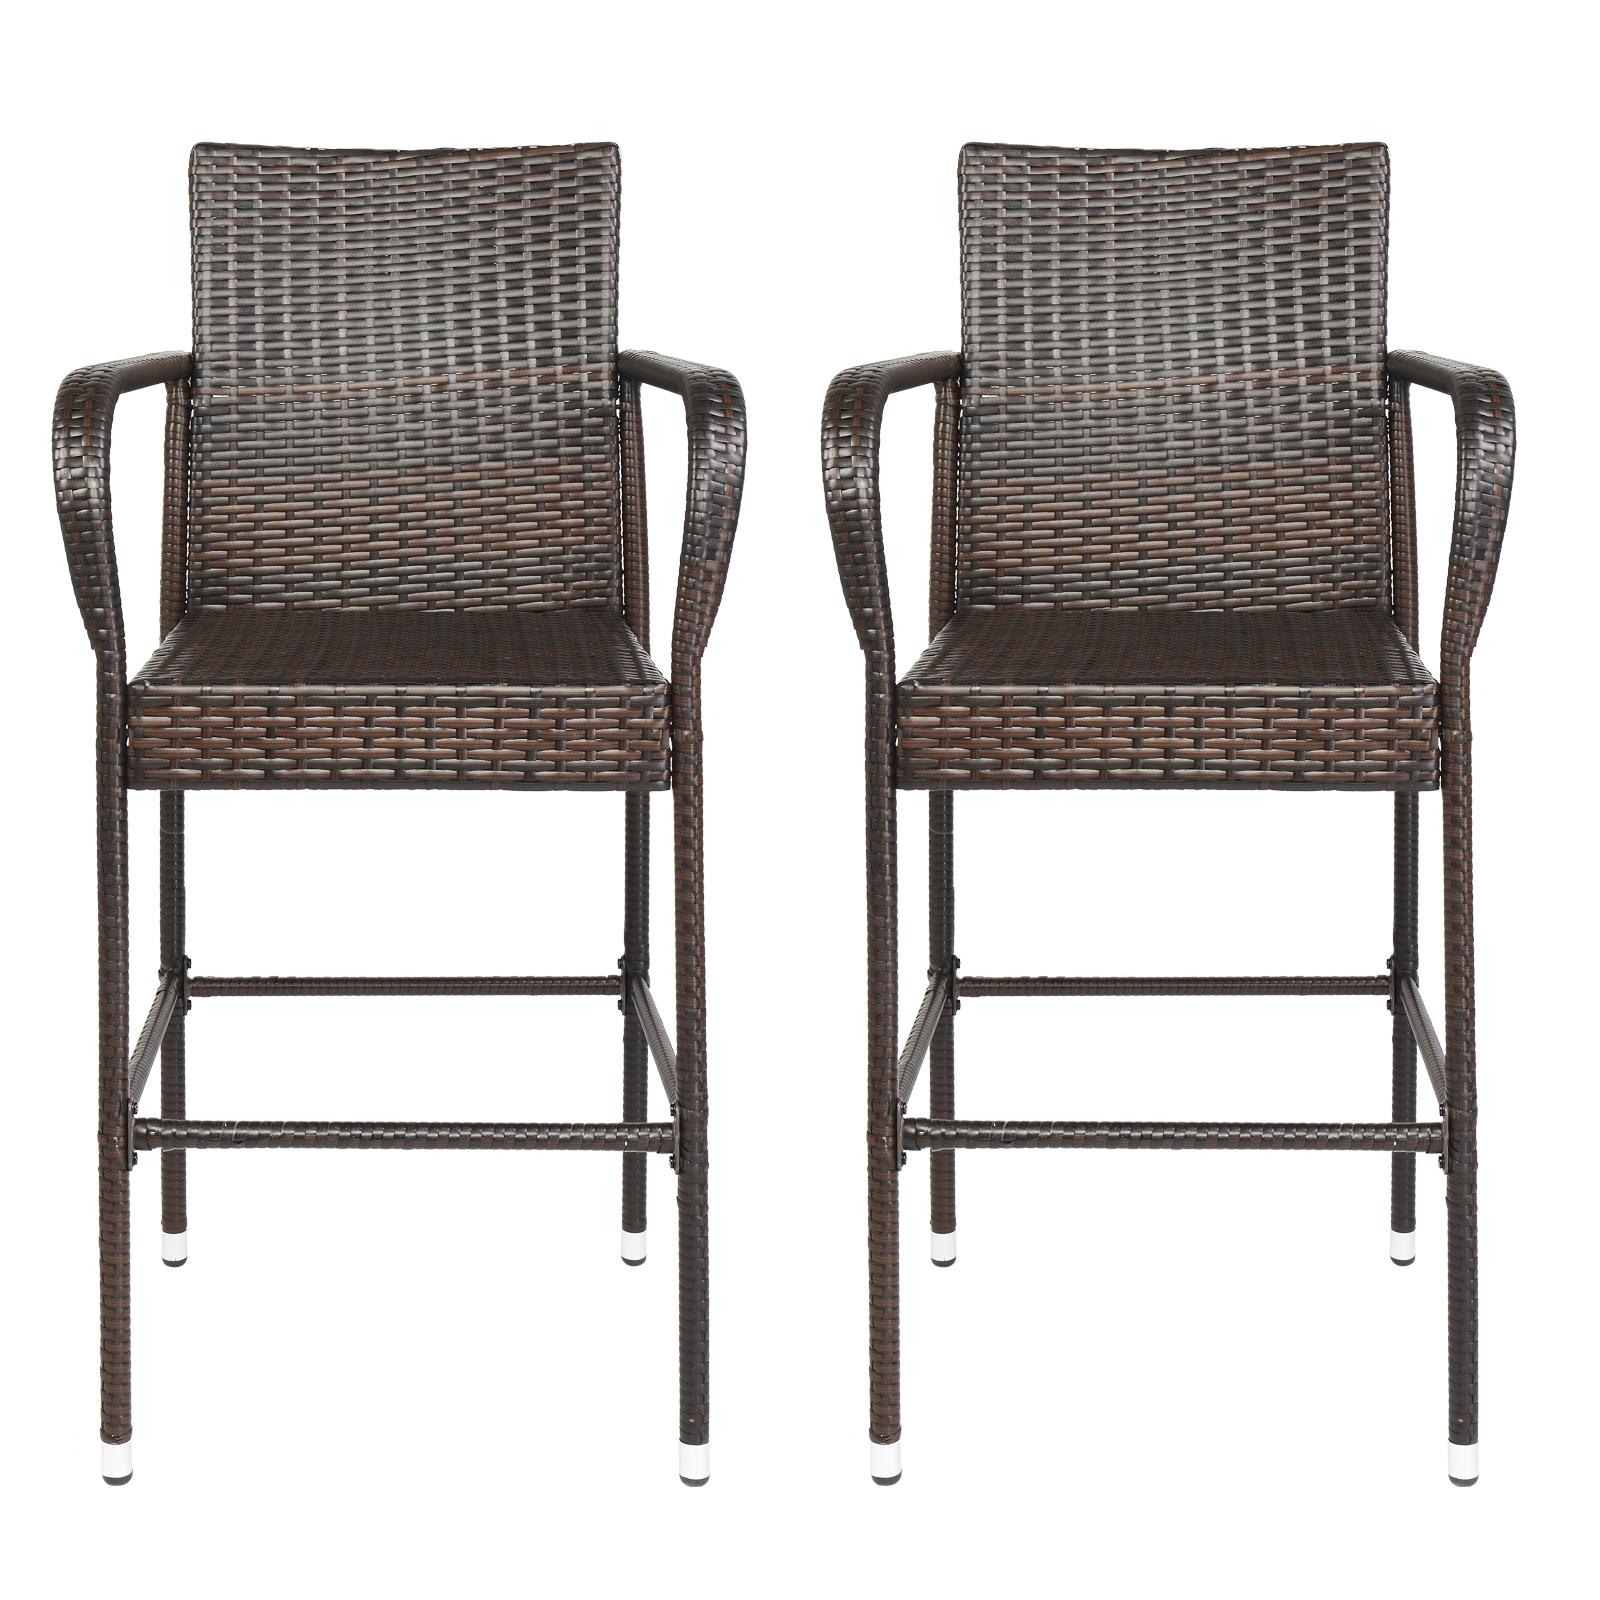 SamyoHome Wicker Bar Stools Outdoor Set of 2, Outdoor Bar Chairs - image 1 of 11